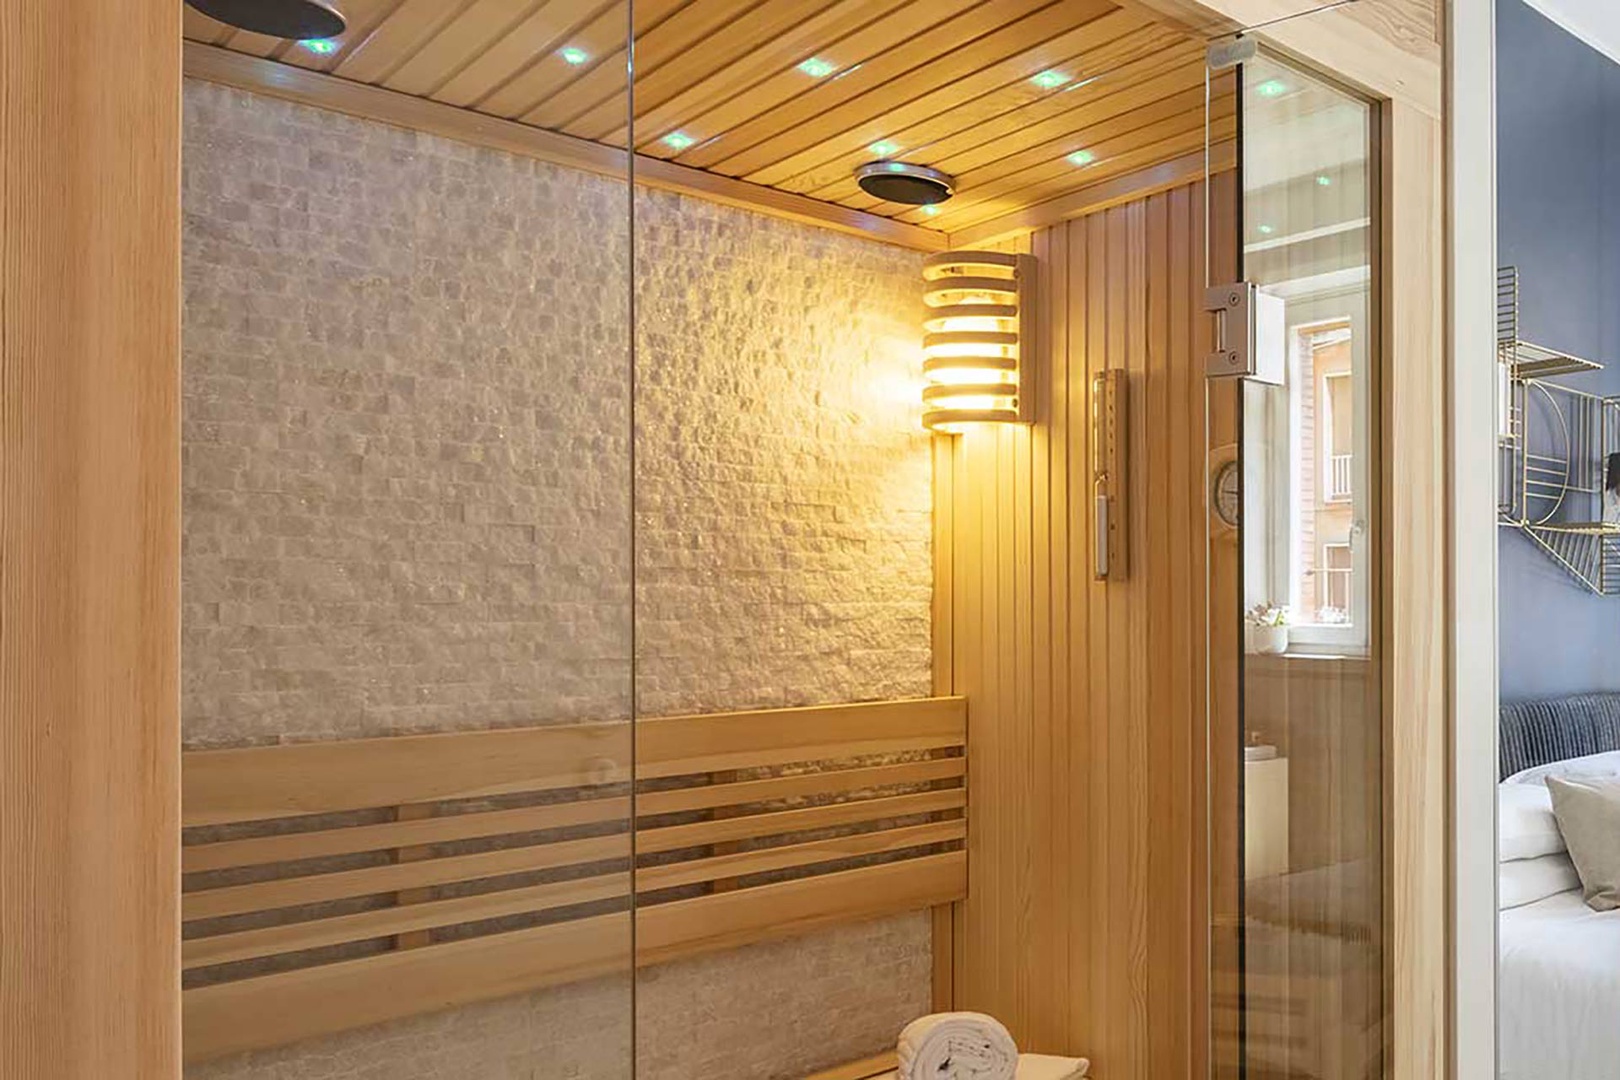 A sauna and jacuzzi tub in bedroom 1 offers luxury and an opportunity for pampering.